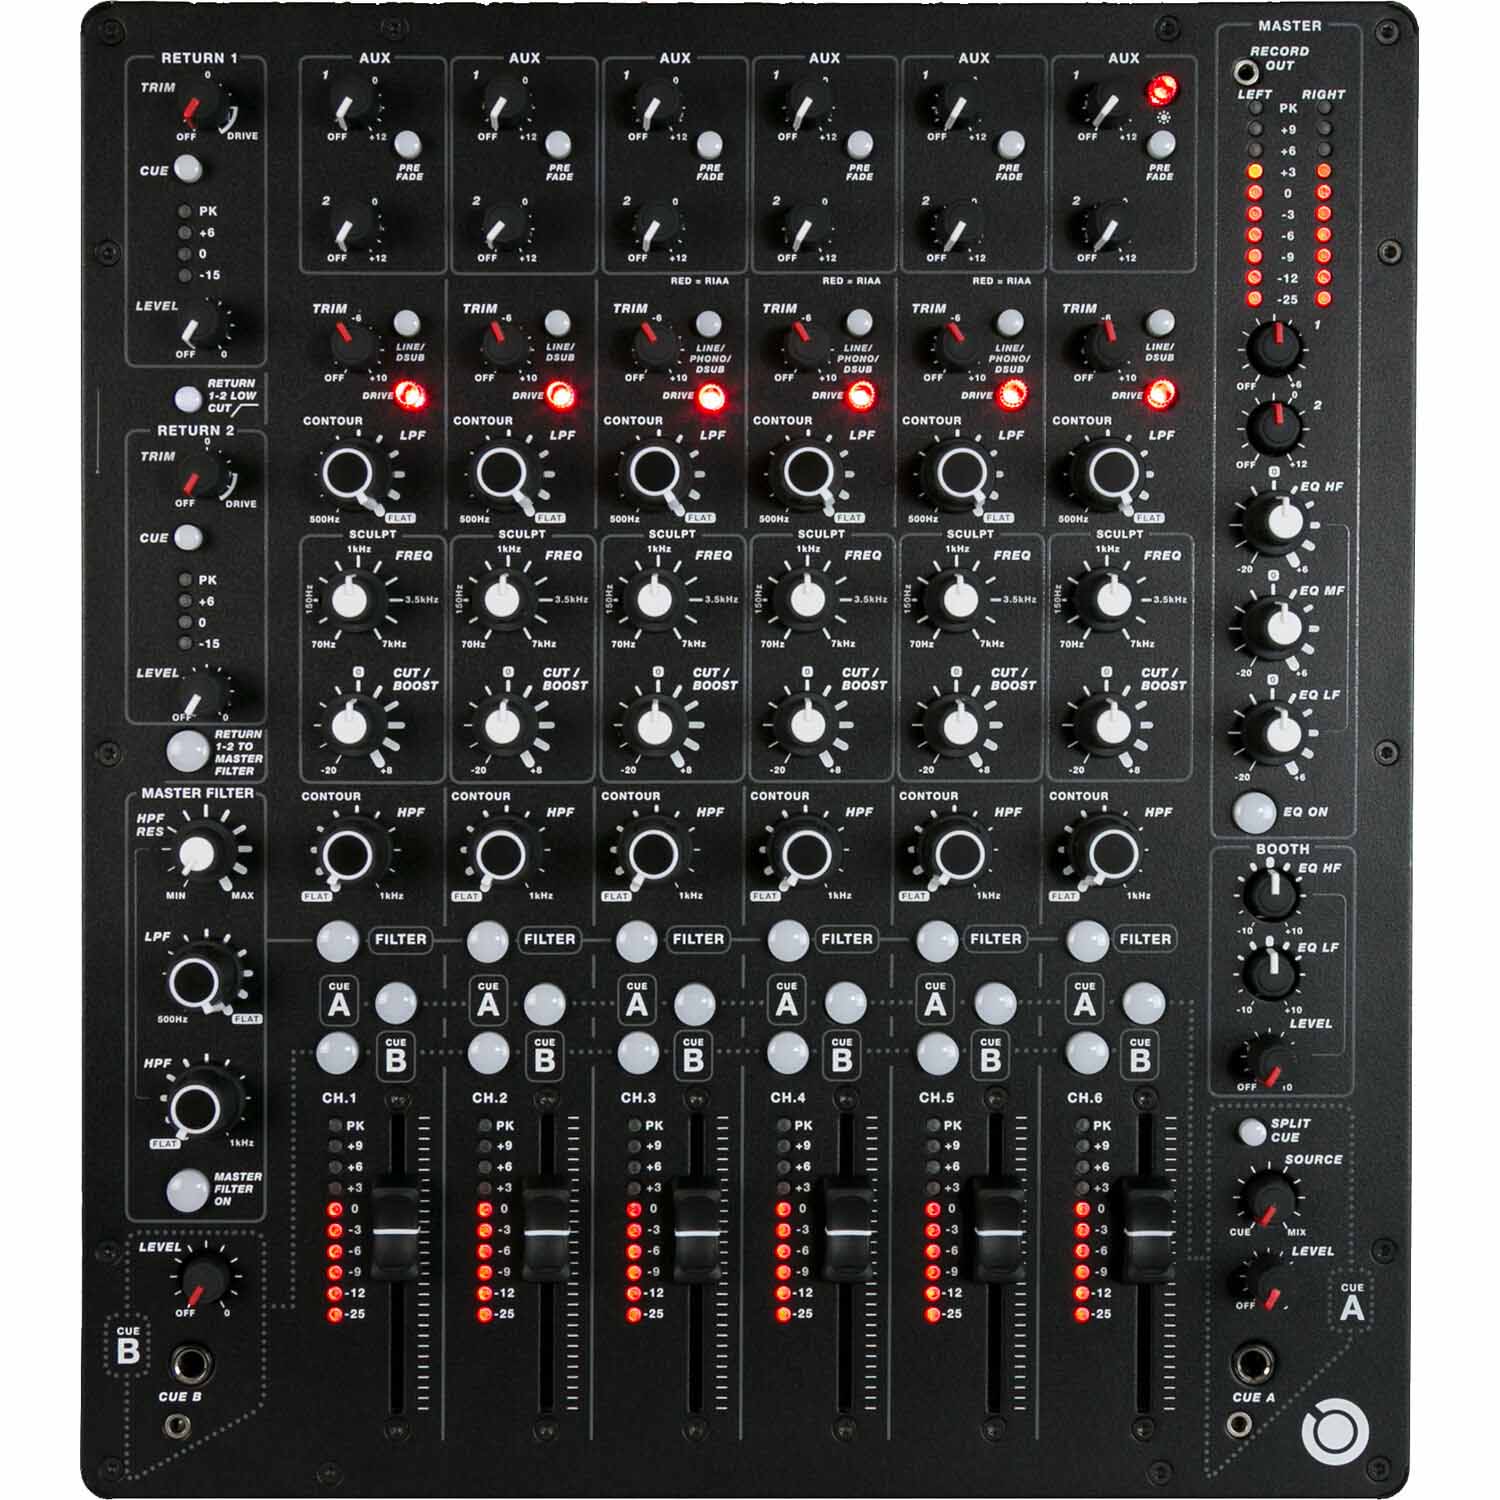 PLAYdifferently MODEL 1 Purely Analogue Mixer - Hollywood DJ